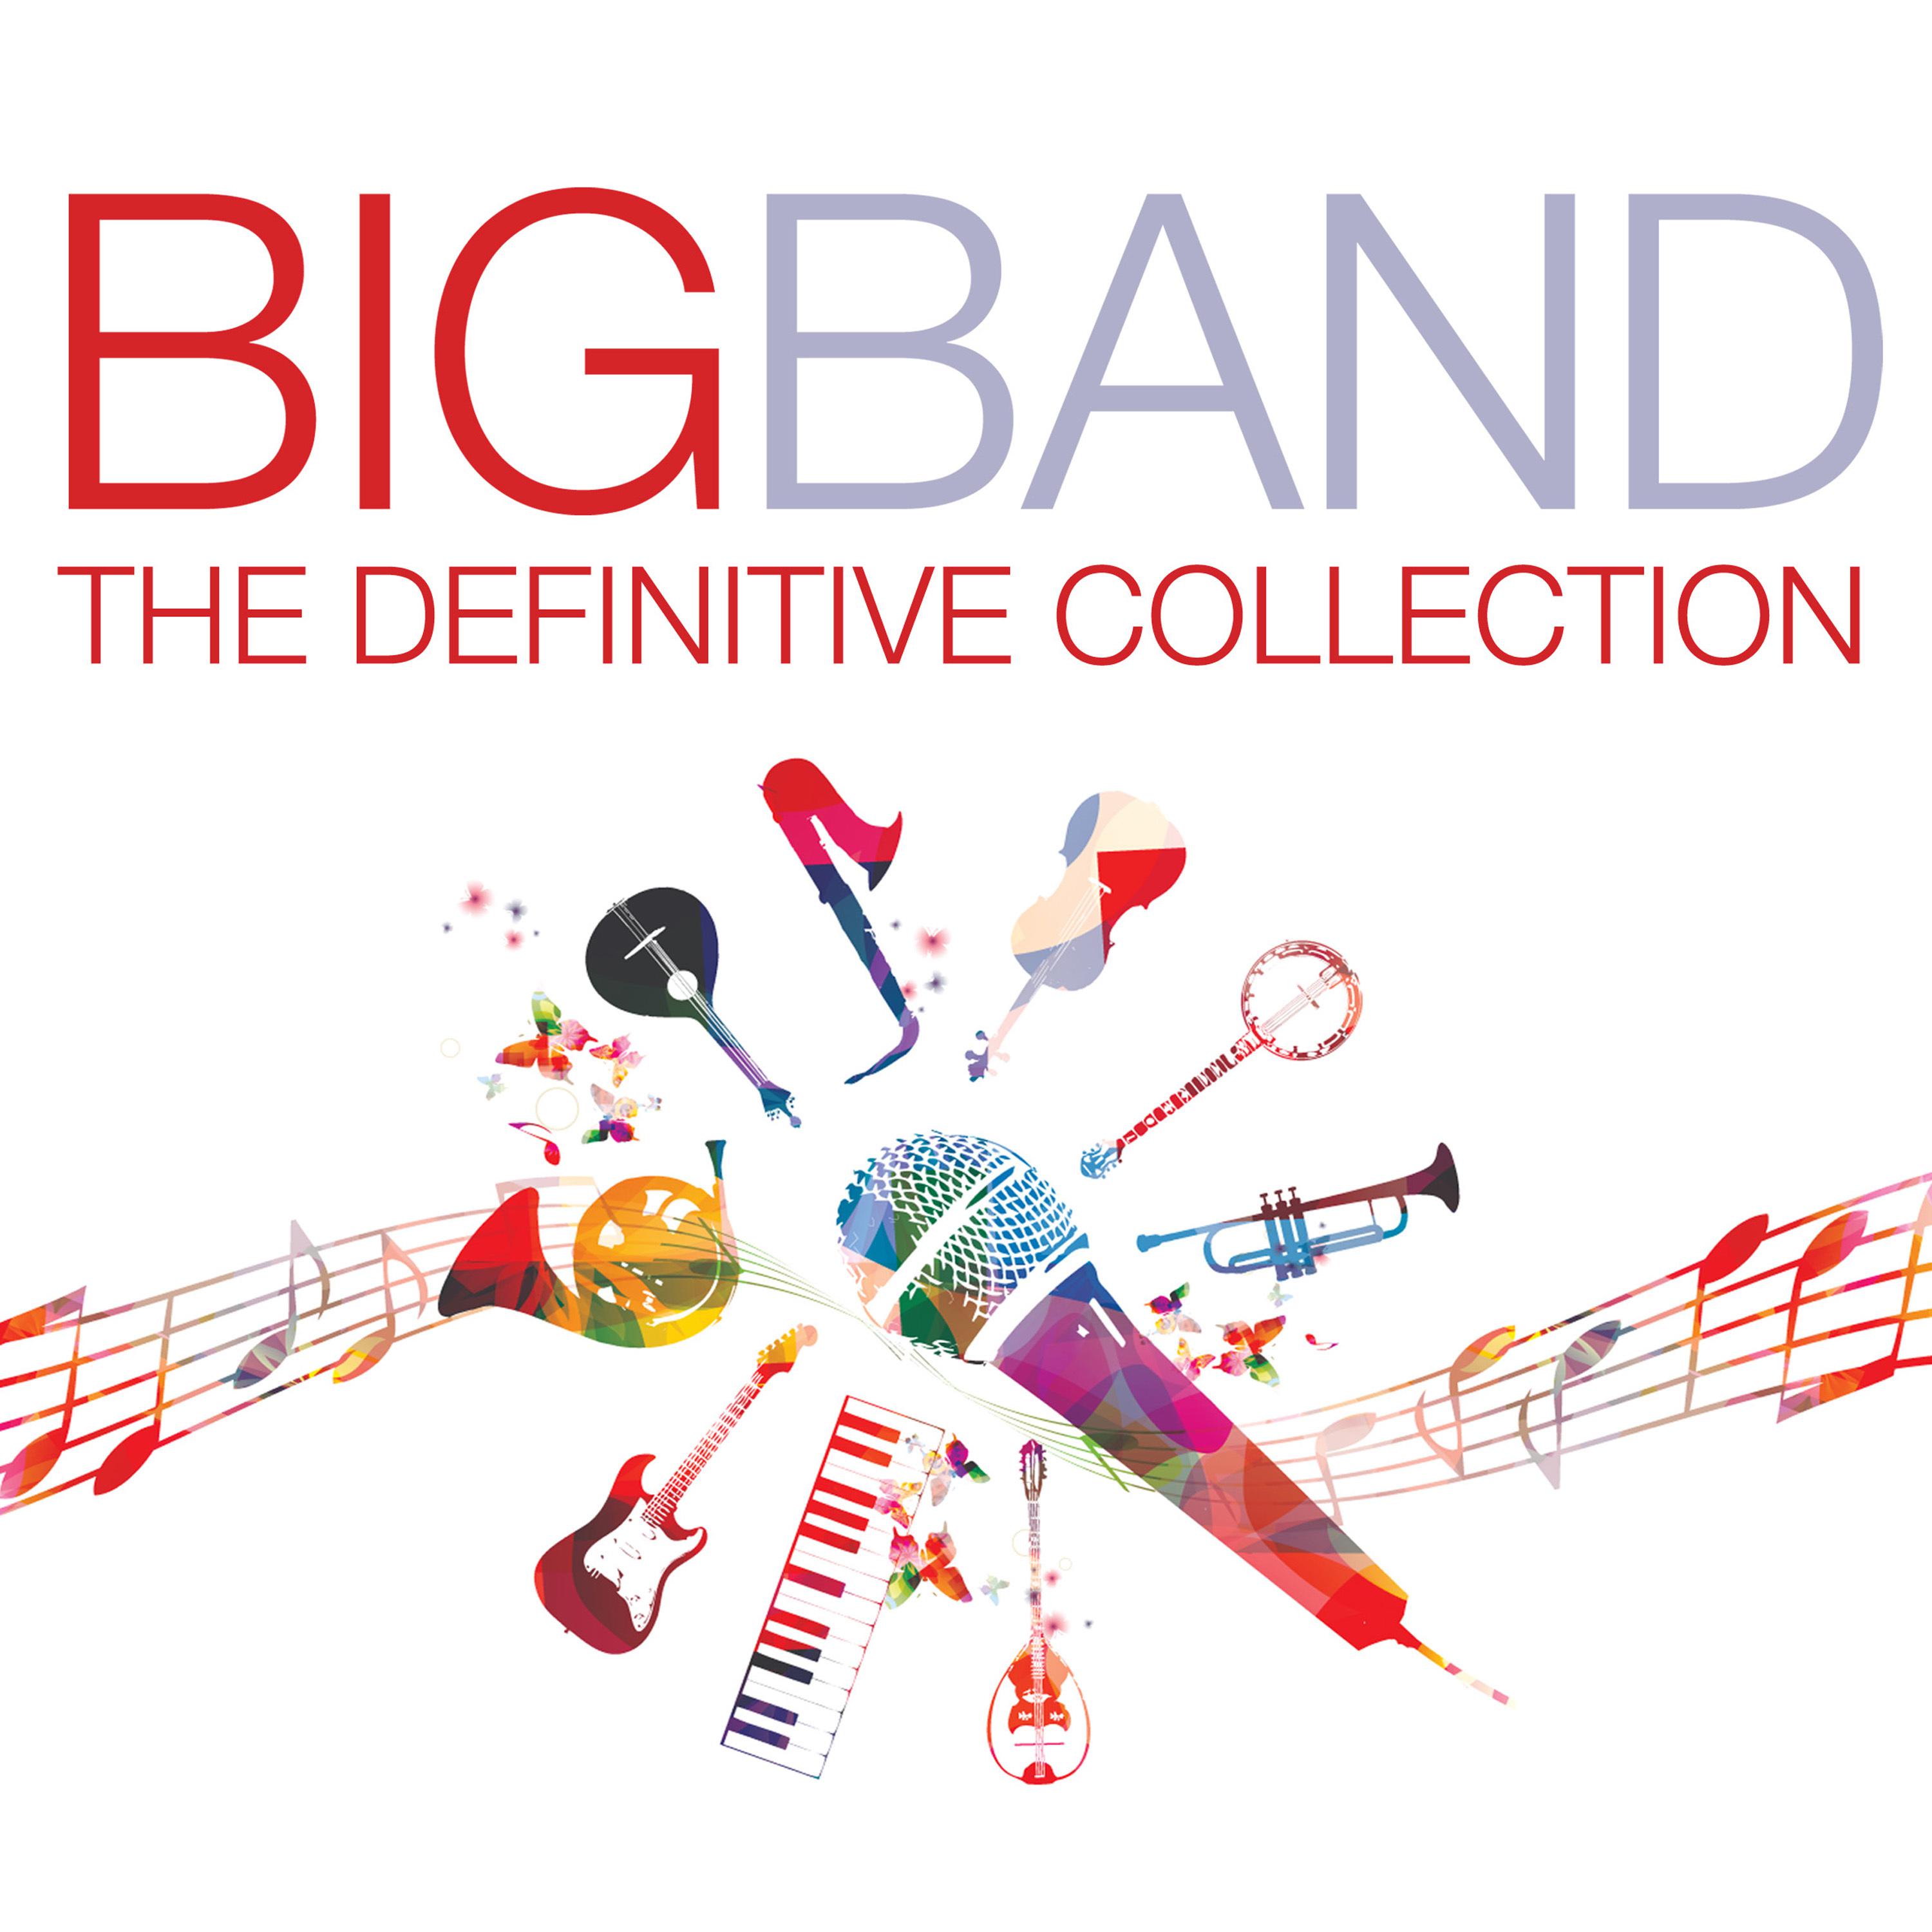 Big Band Definitive Collection